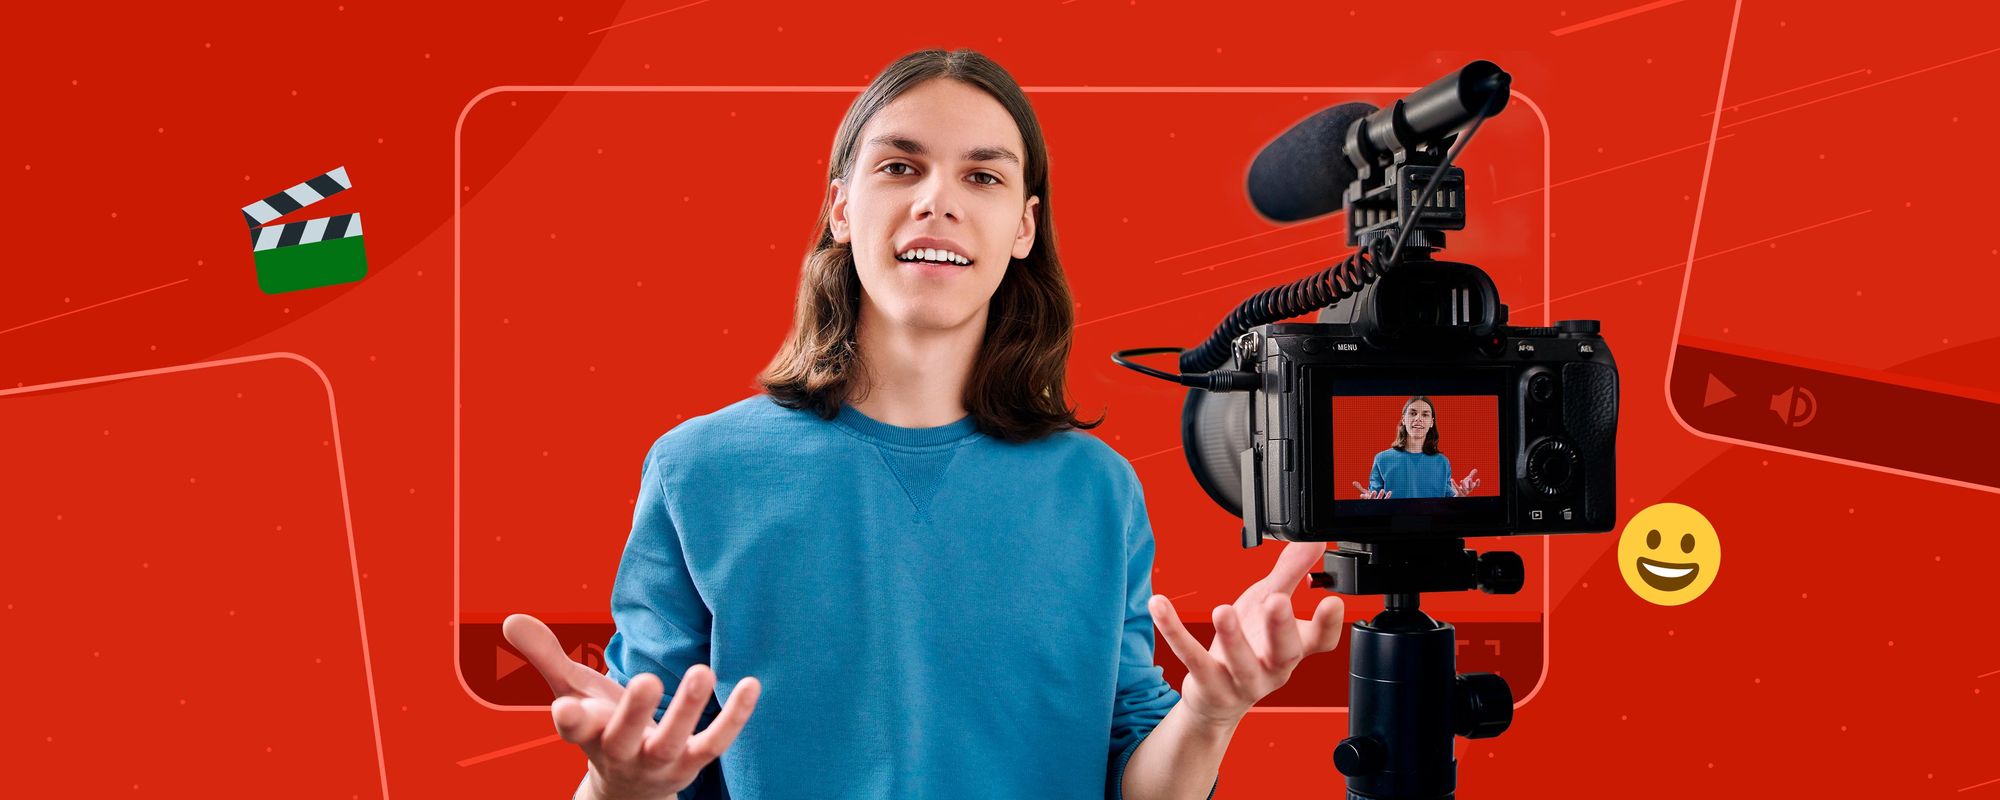 How to make a YouTube video: A 7-step guide for beginners